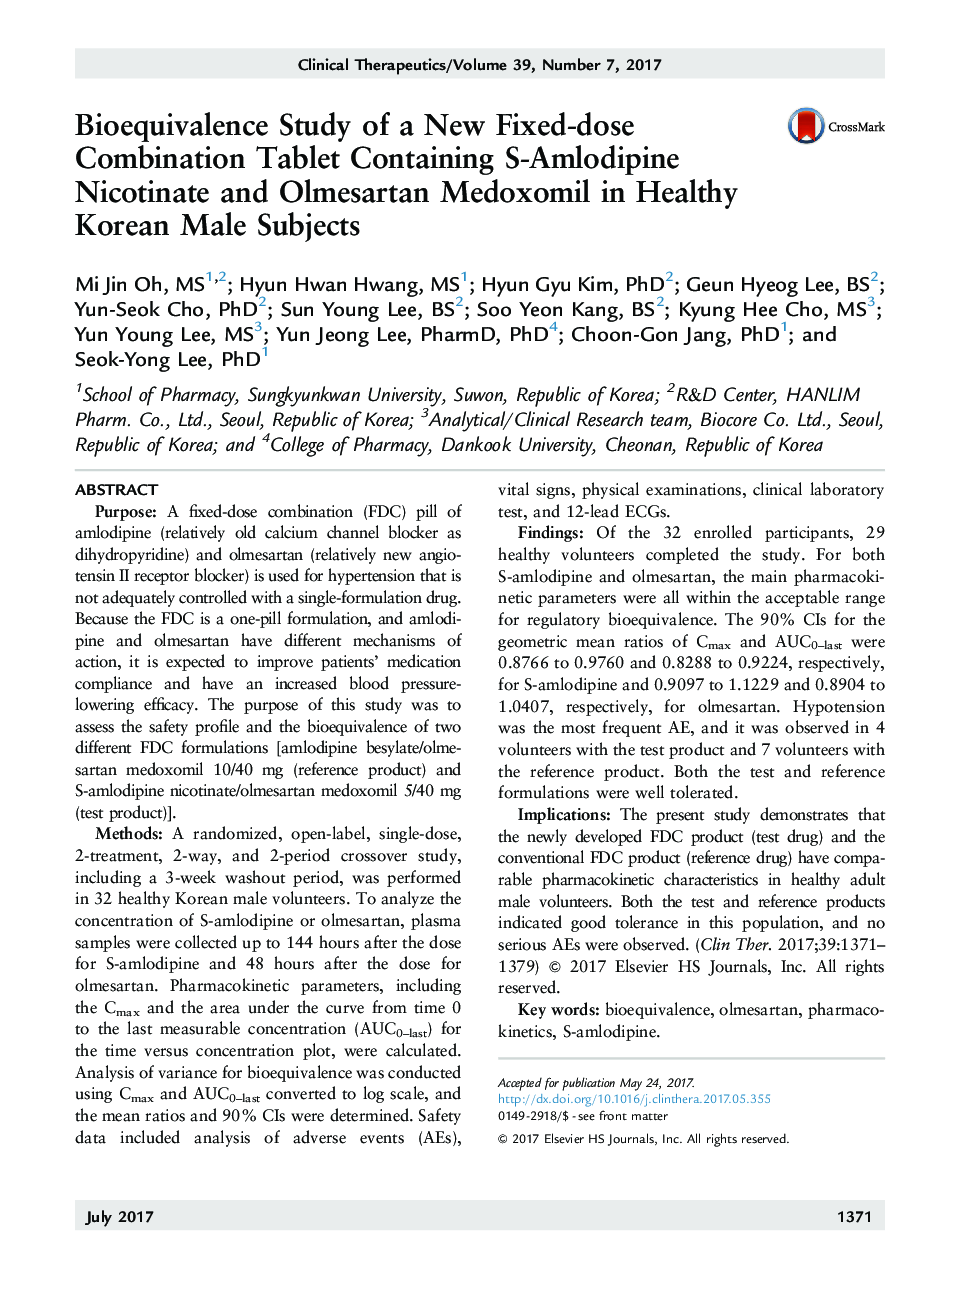 Bioequivalence Study of a New Fixed-dose Combination Tablet Containing S-Amlodipine Nicotinate and Olmesartan Medoxomil in Healthy Korean Male Subjects